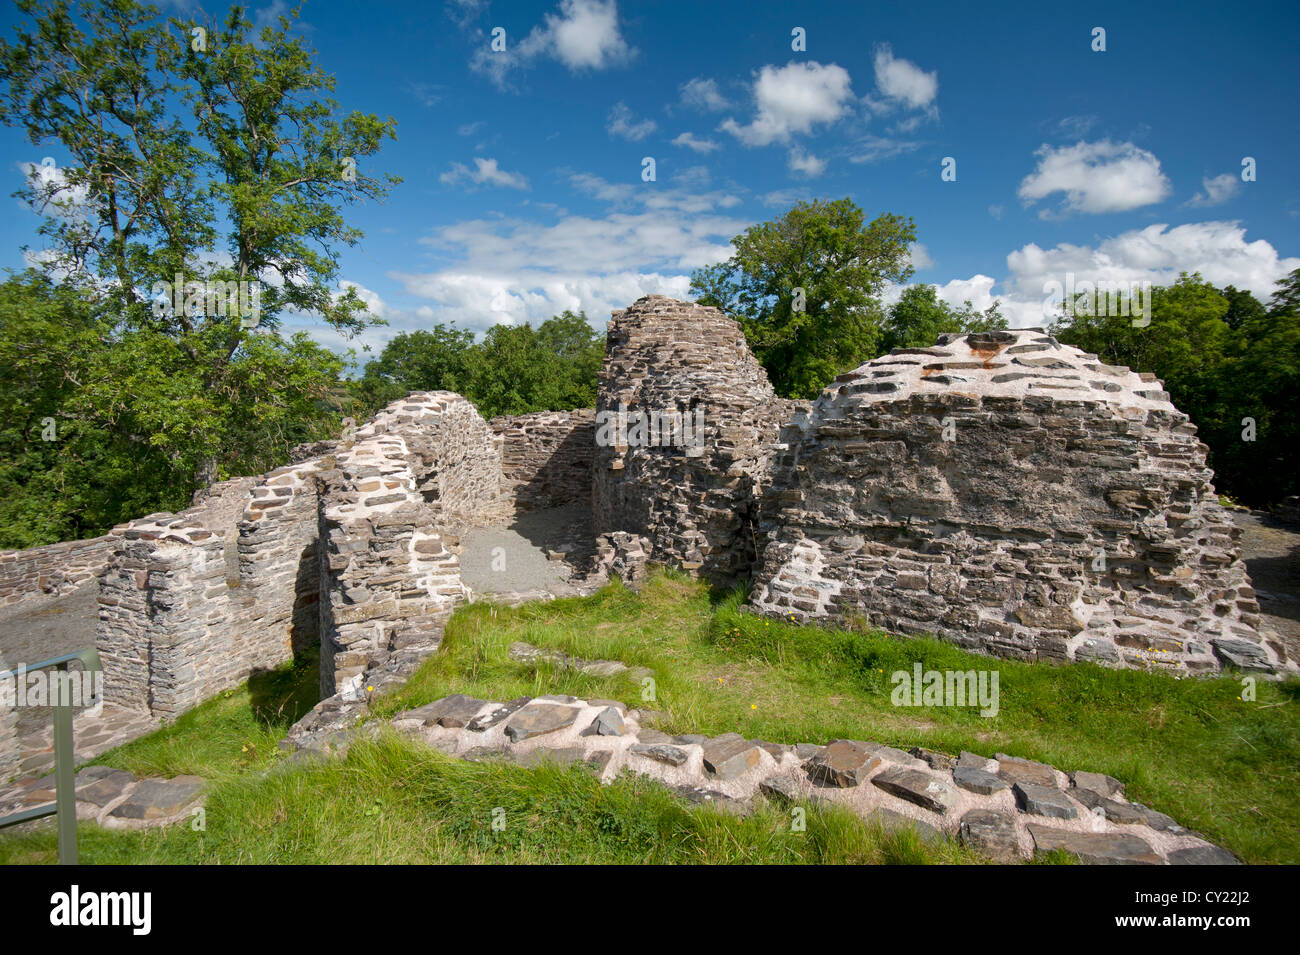 Dolforwyn Castle, recently excavated ruins in Powys, Montgomeryshire. Mid Wales.  SC0 8704 Stock Photo